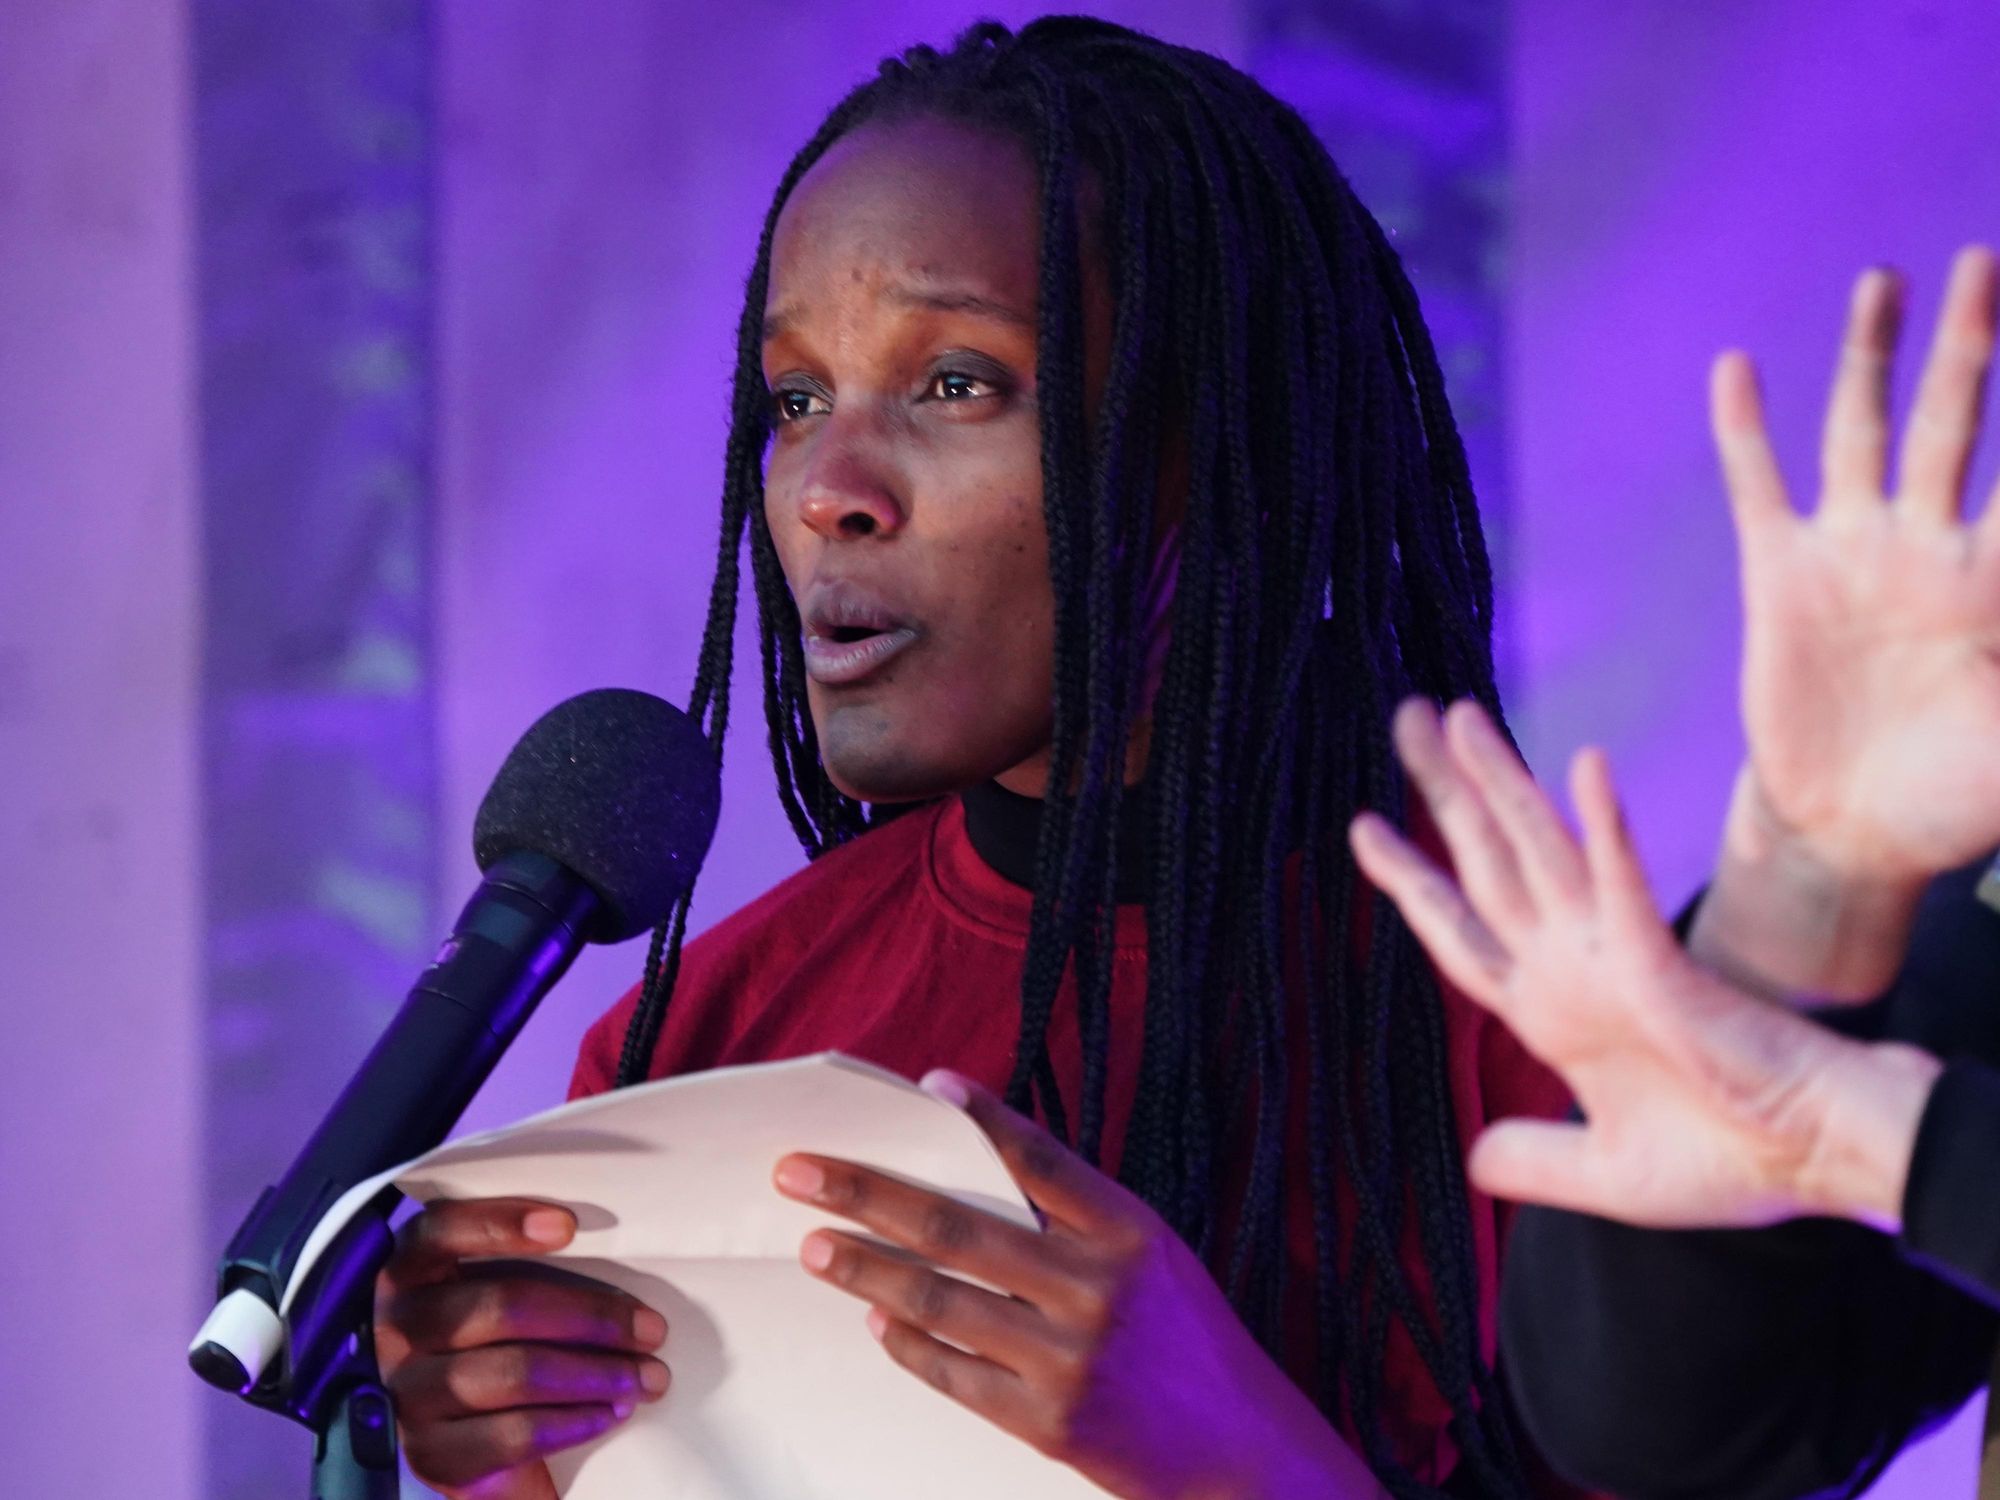 An image of ​Ugandan climate justice activist Vanessa Nakate talking at a microphone while holding a piece of paper.